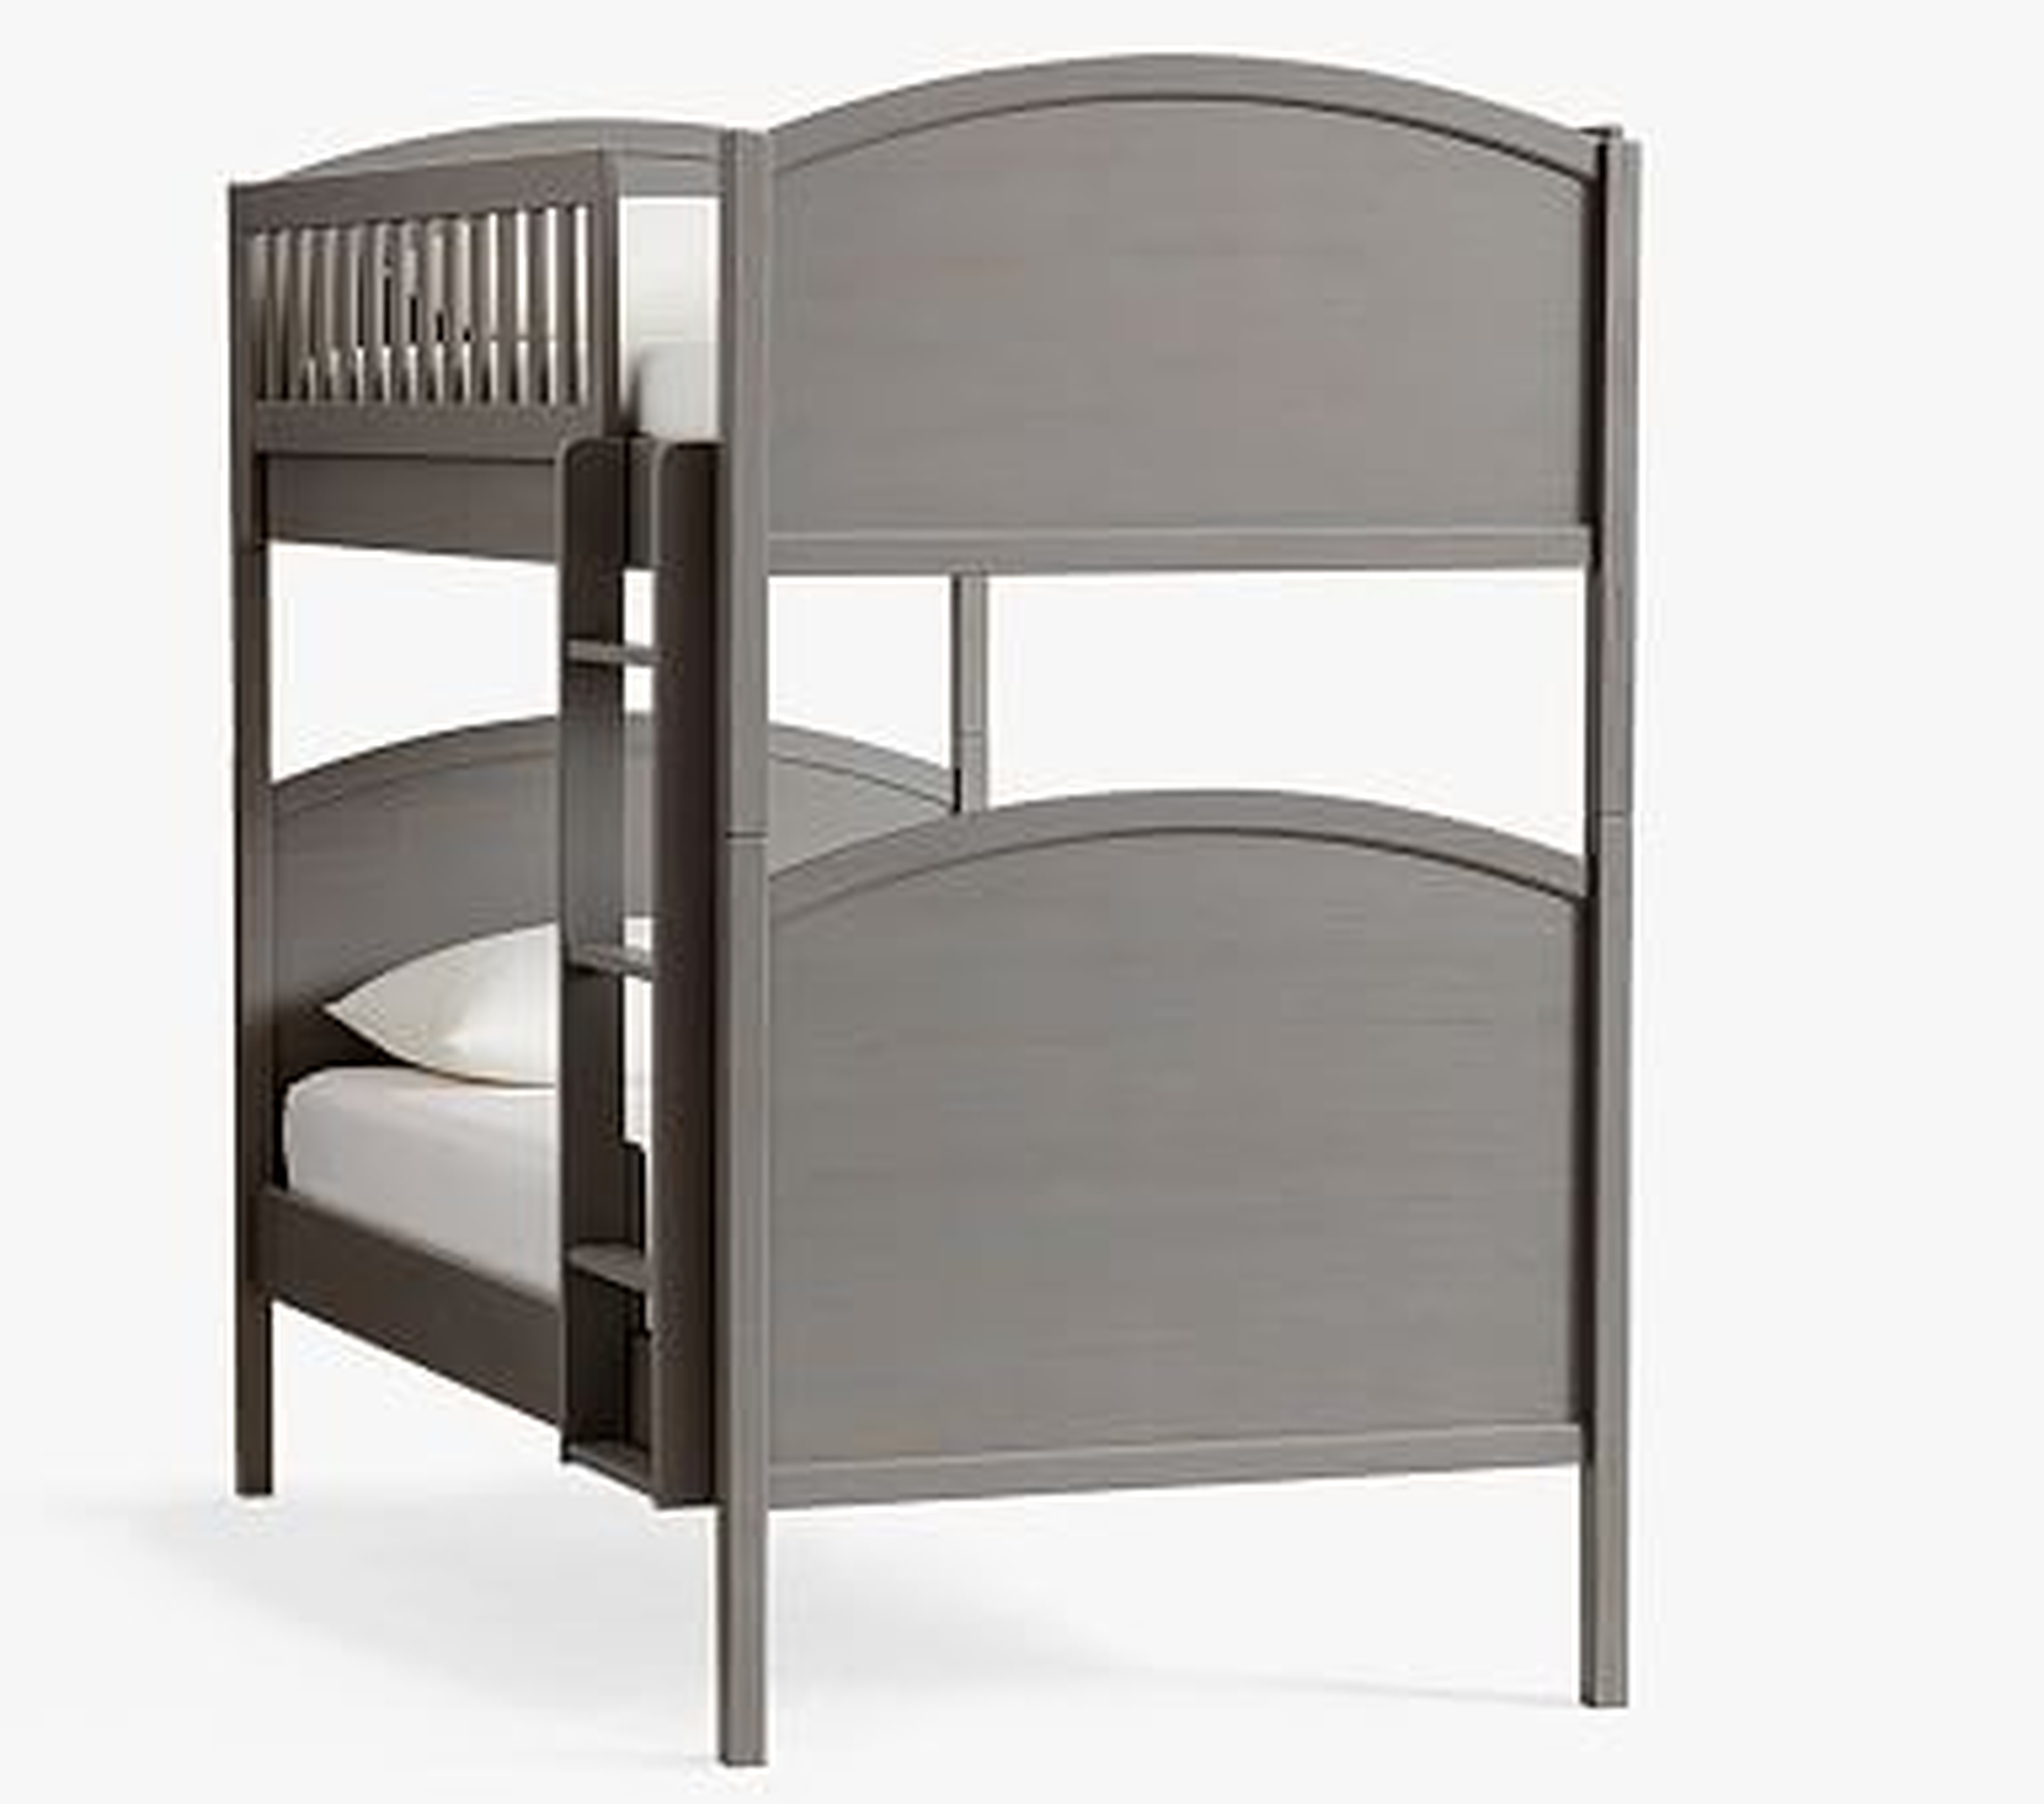 Austen Twin-over-Twin Bunk Bed, Antiqued Charcoal - Pottery Barn Kids